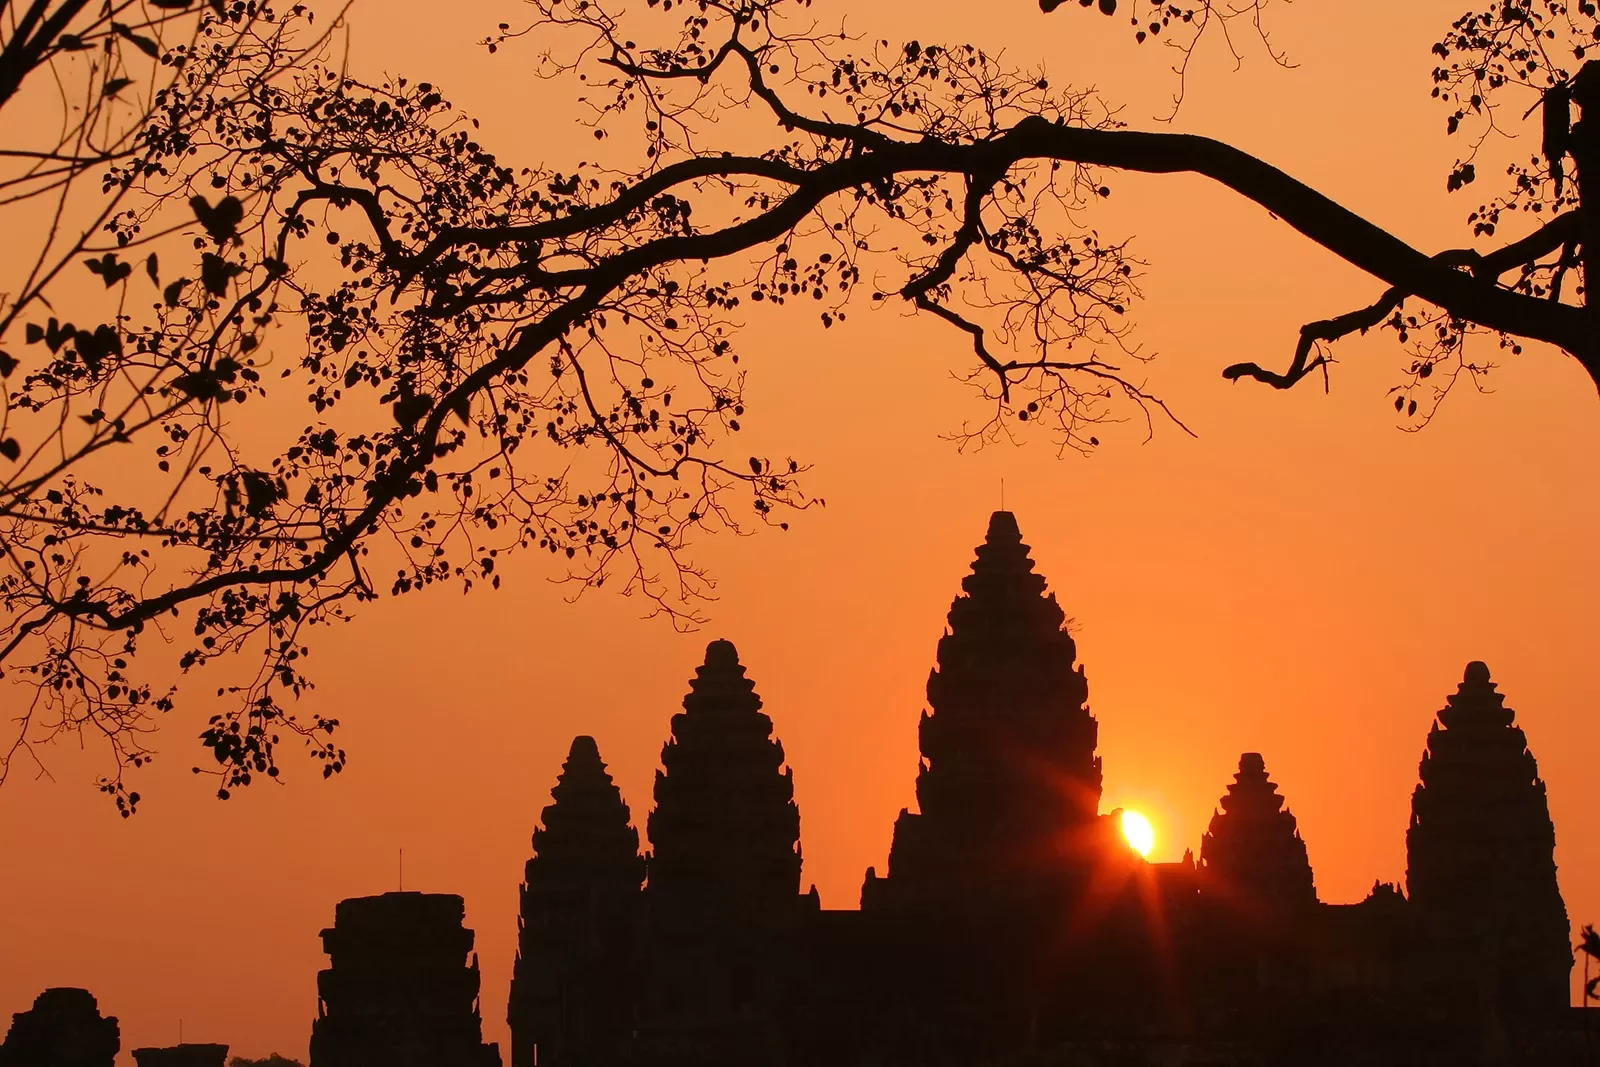 Angkor Wat temple at sunset in Cambodia